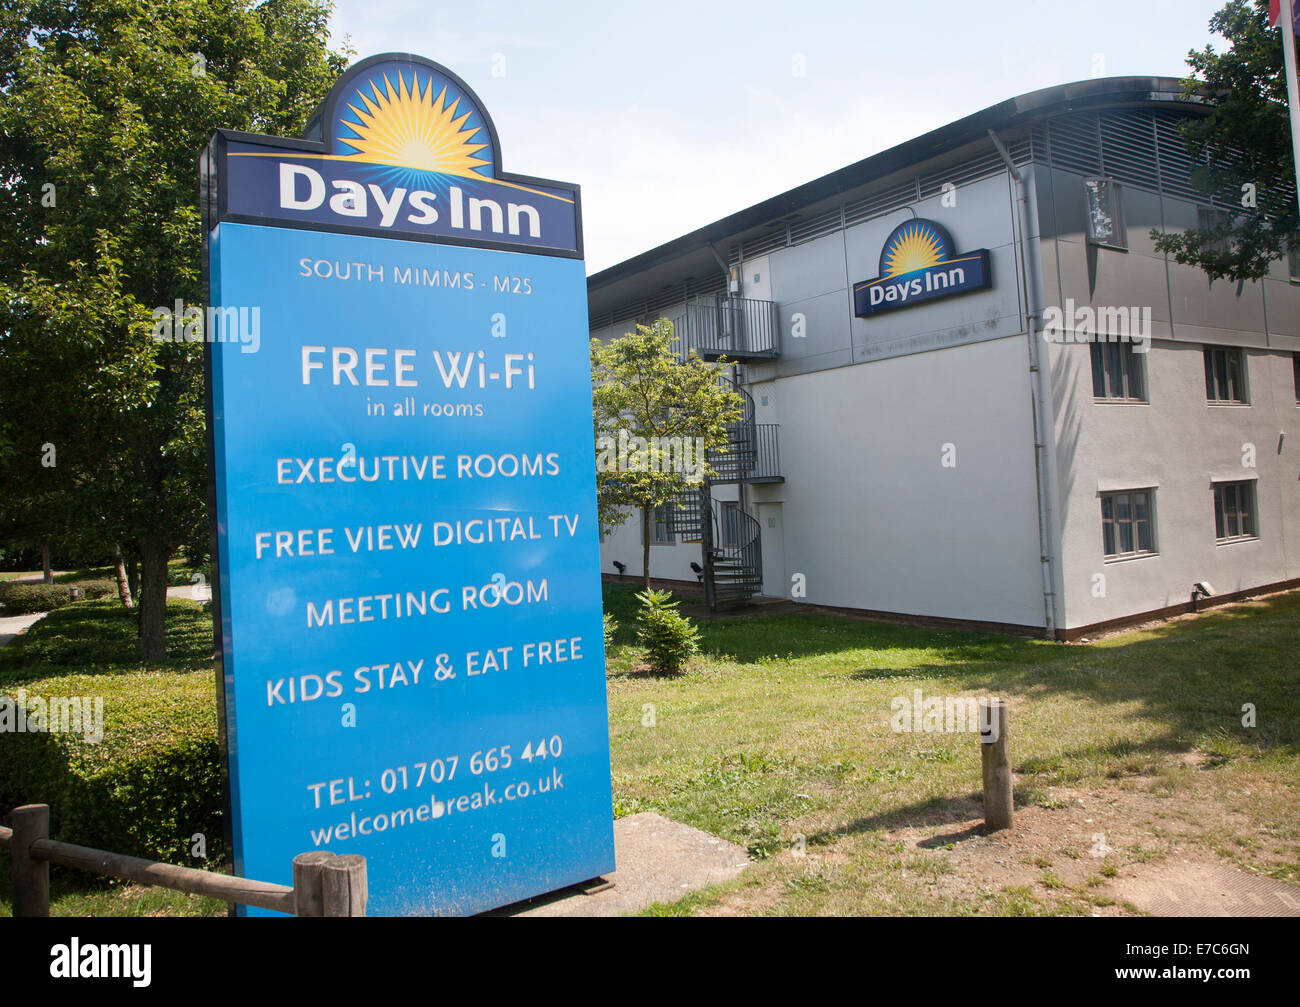 Days Inn budget hotel à South Mimms, Potters Bar, Hertfordshire, Angleterre Banque D'Images